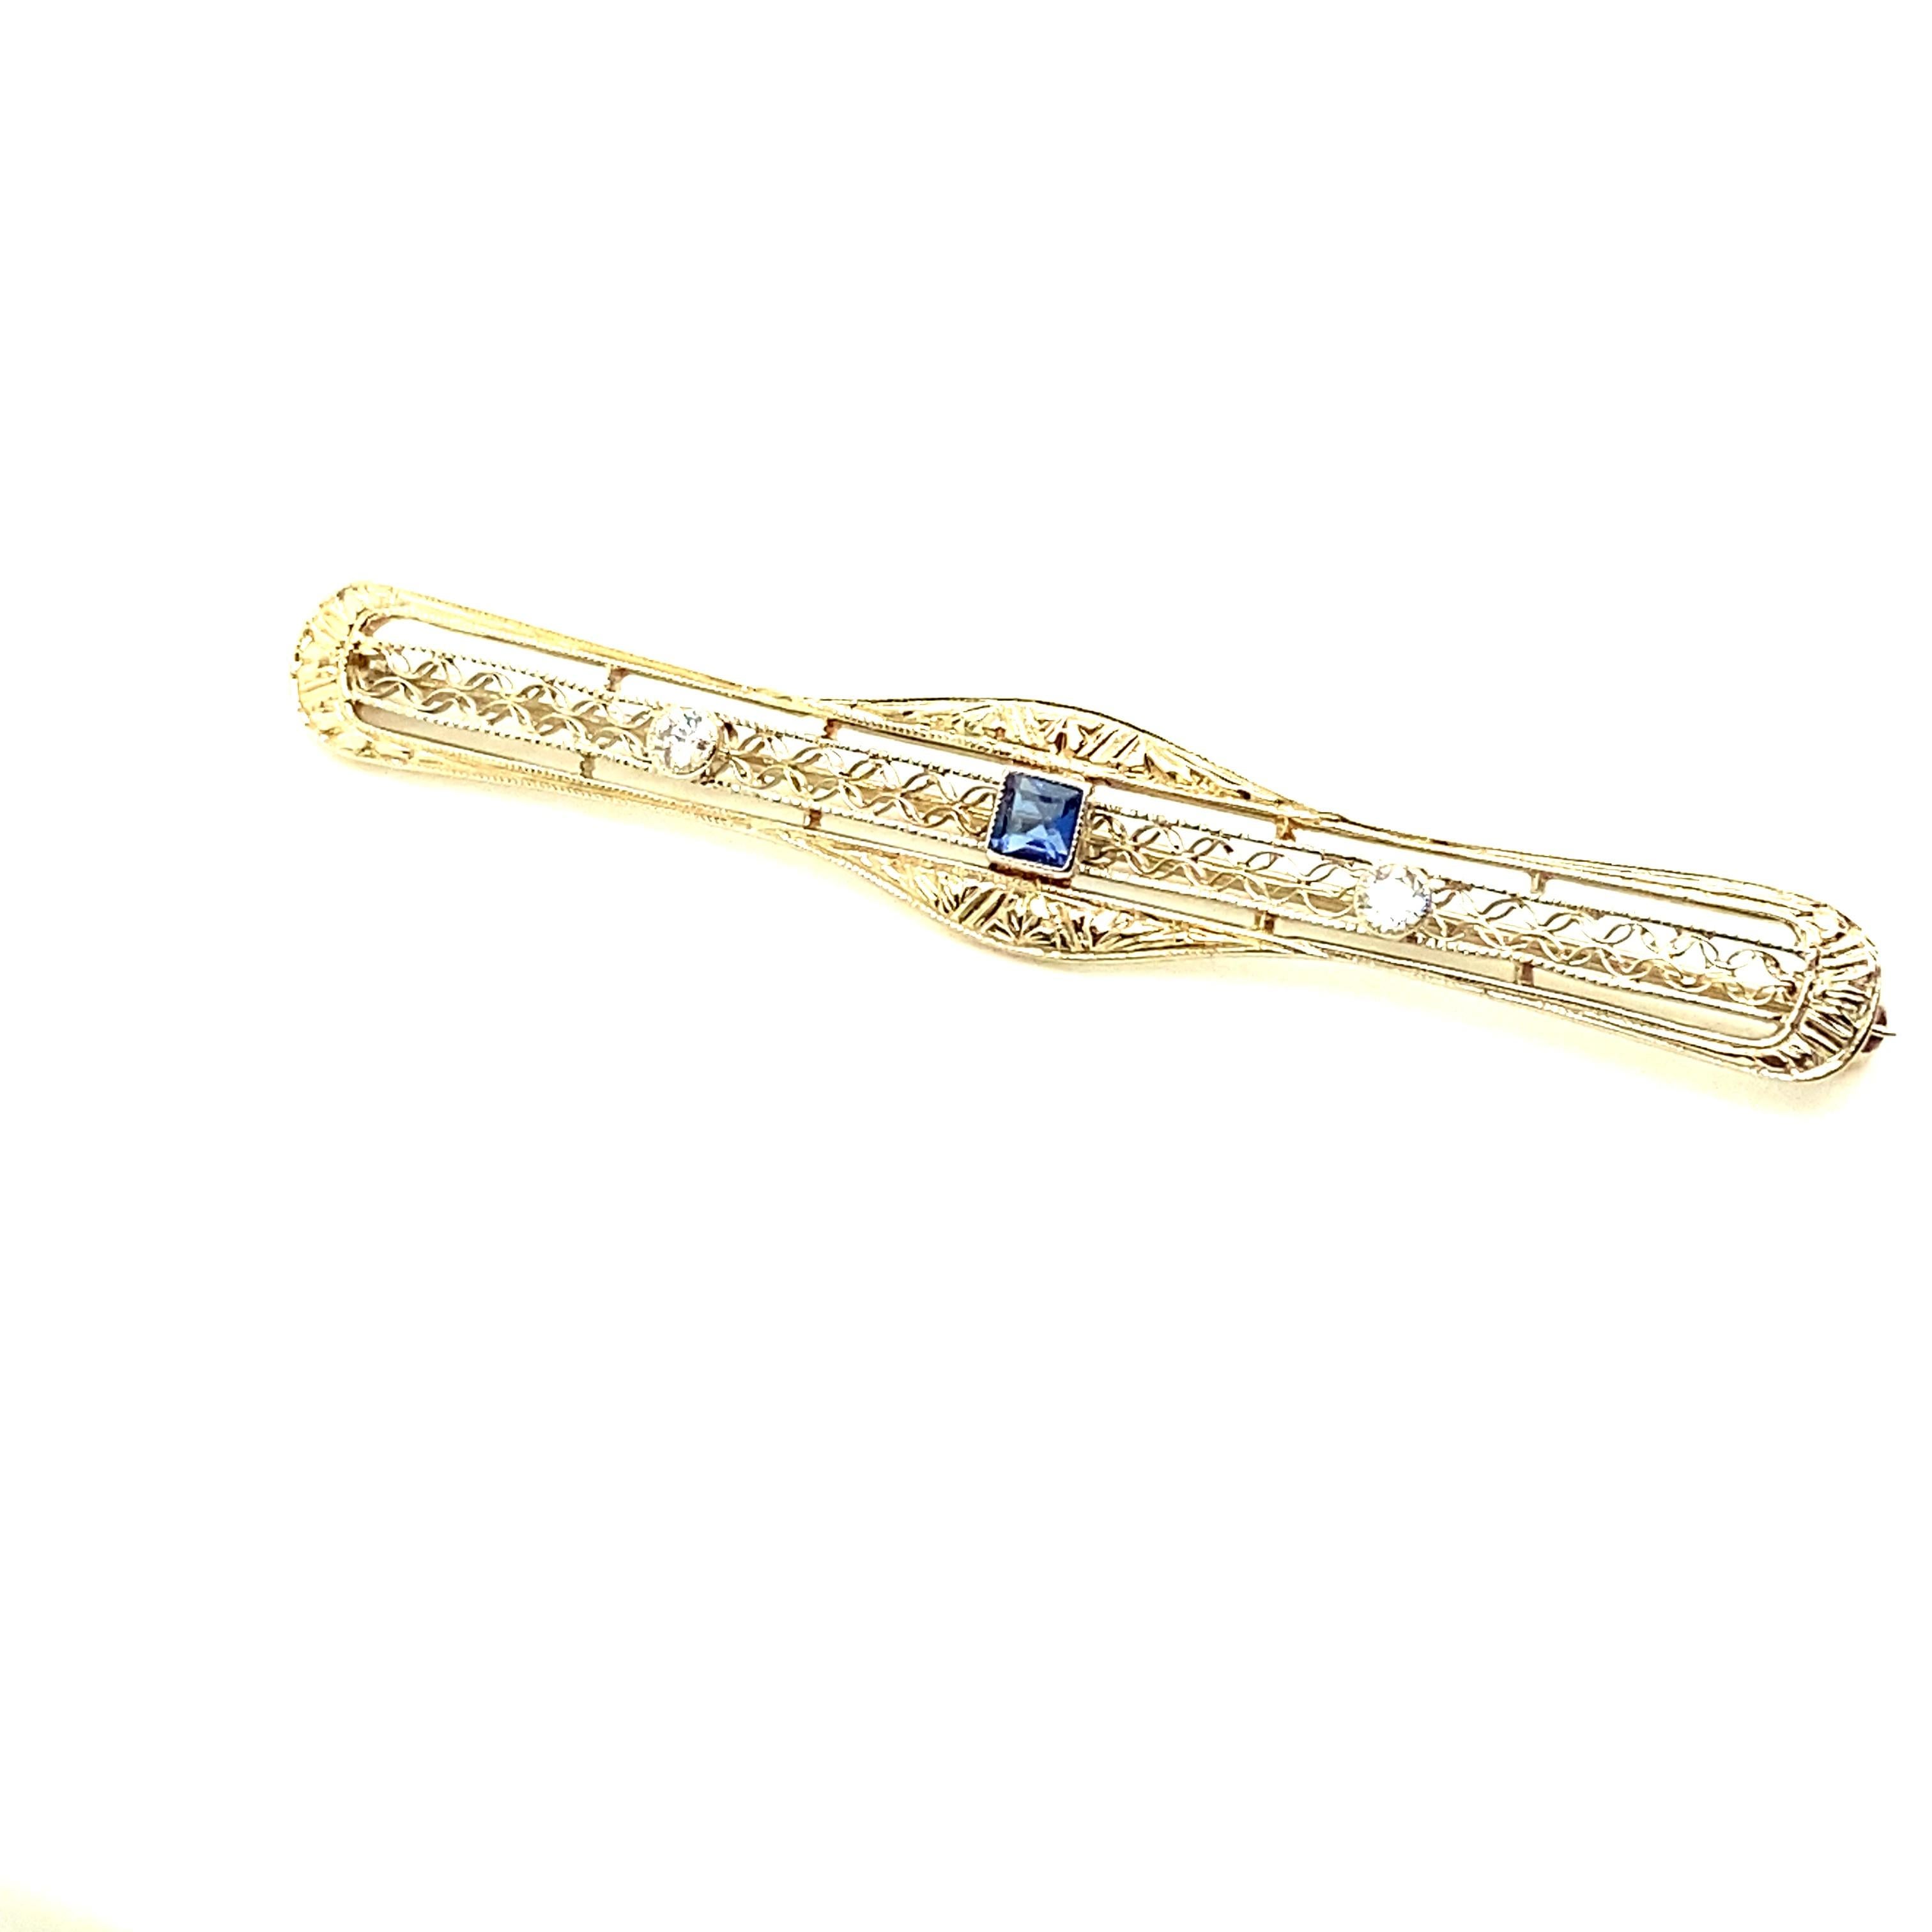 Completely original and completely gorgeous 14kt white and yellow gold Art Deco Bar pin. The pin contains one center square shaped sapphire and two round diamonds (one on either side of the center sapphire). 

The pin measures 2.50 inches long by